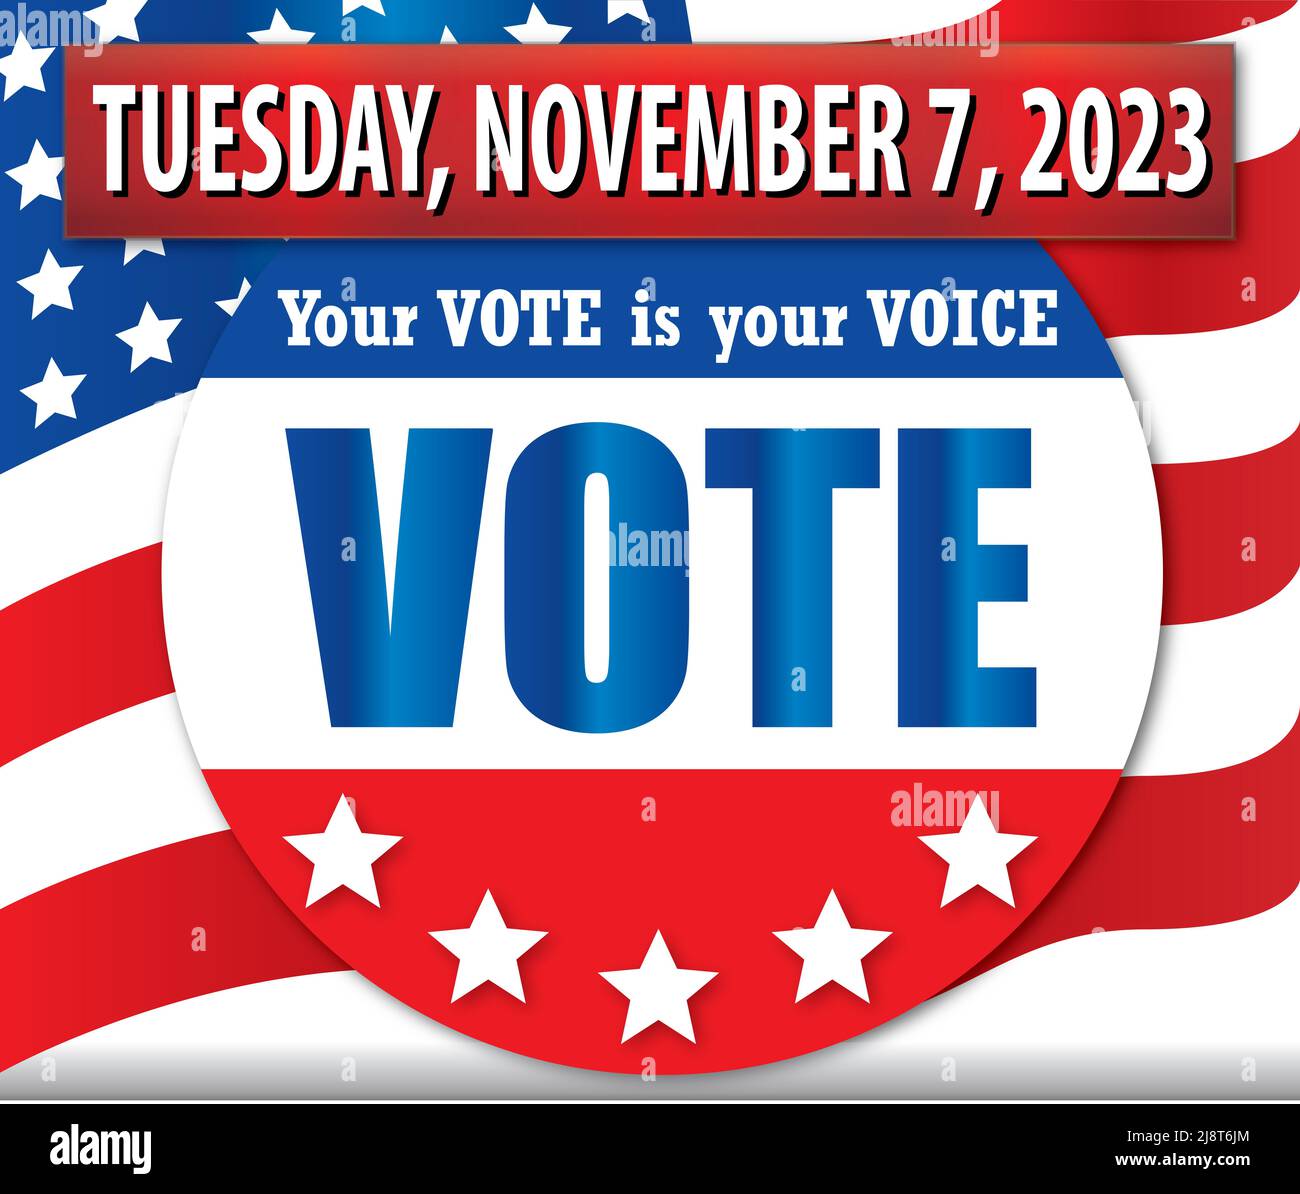 Vote on Election Day 2023 Stock Photo Alamy